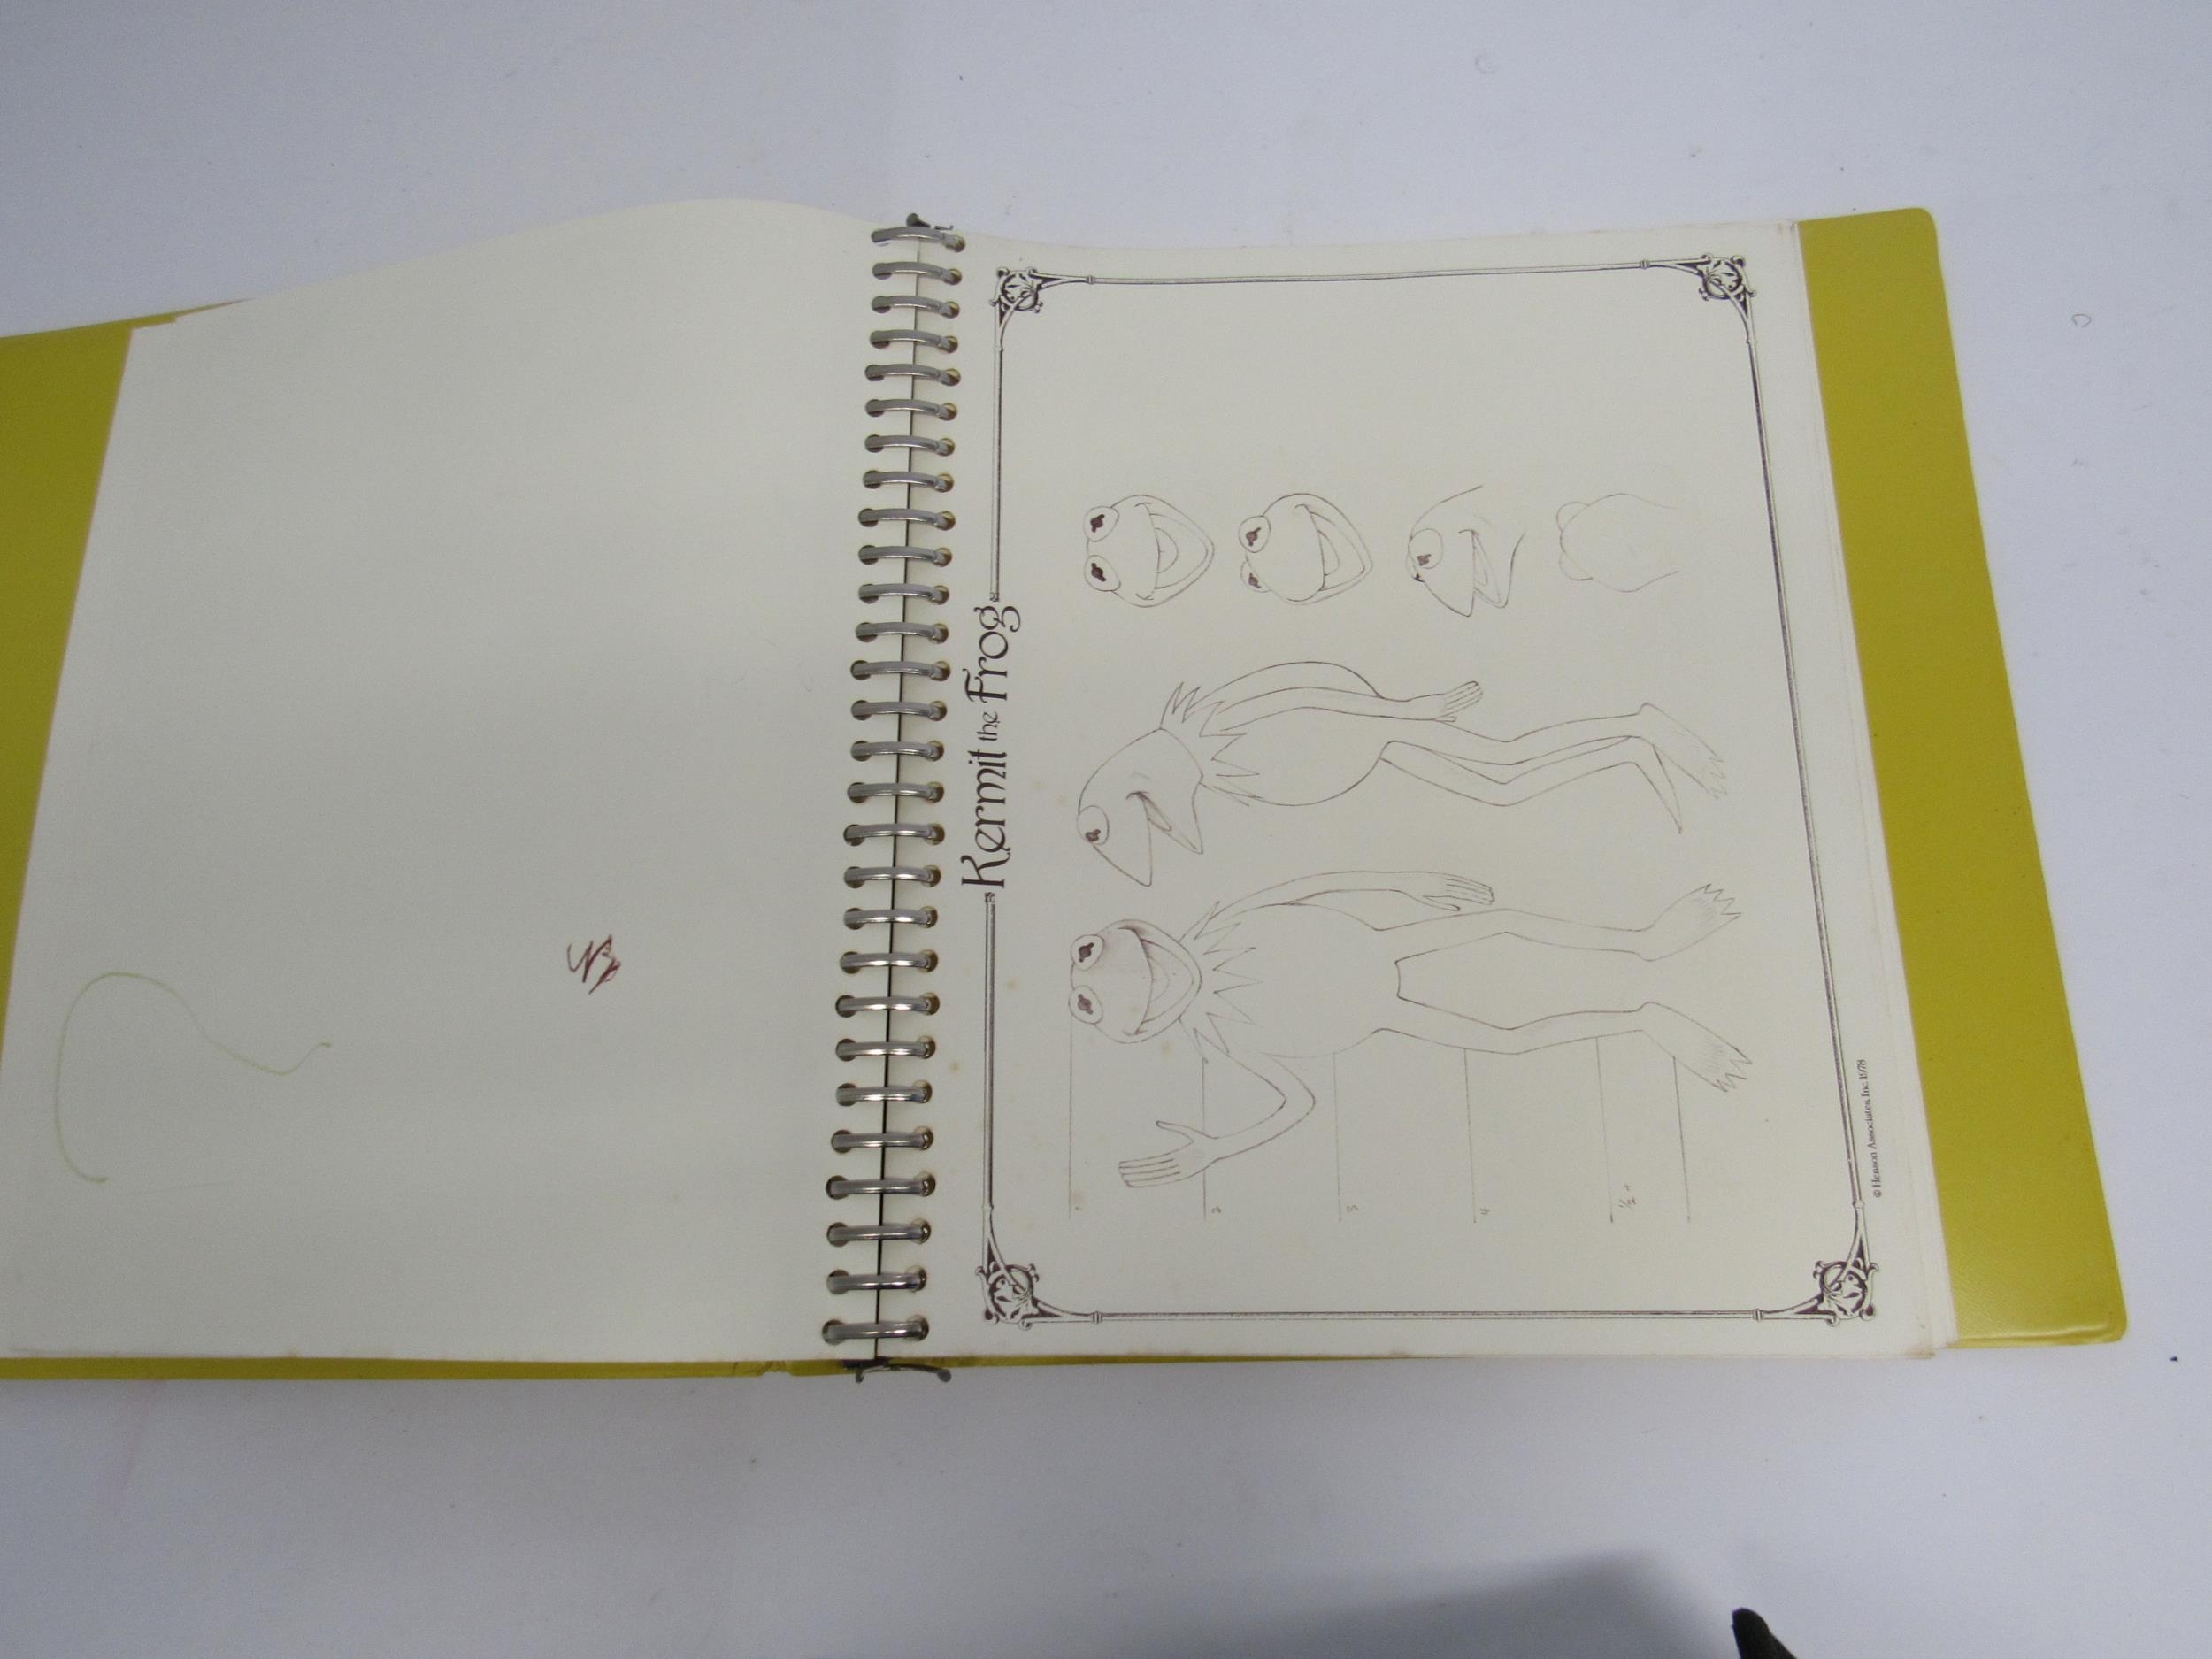 'The Muppet Show Style Book', book of style guides and character motifs for The Muppets, distributed - Image 5 of 9